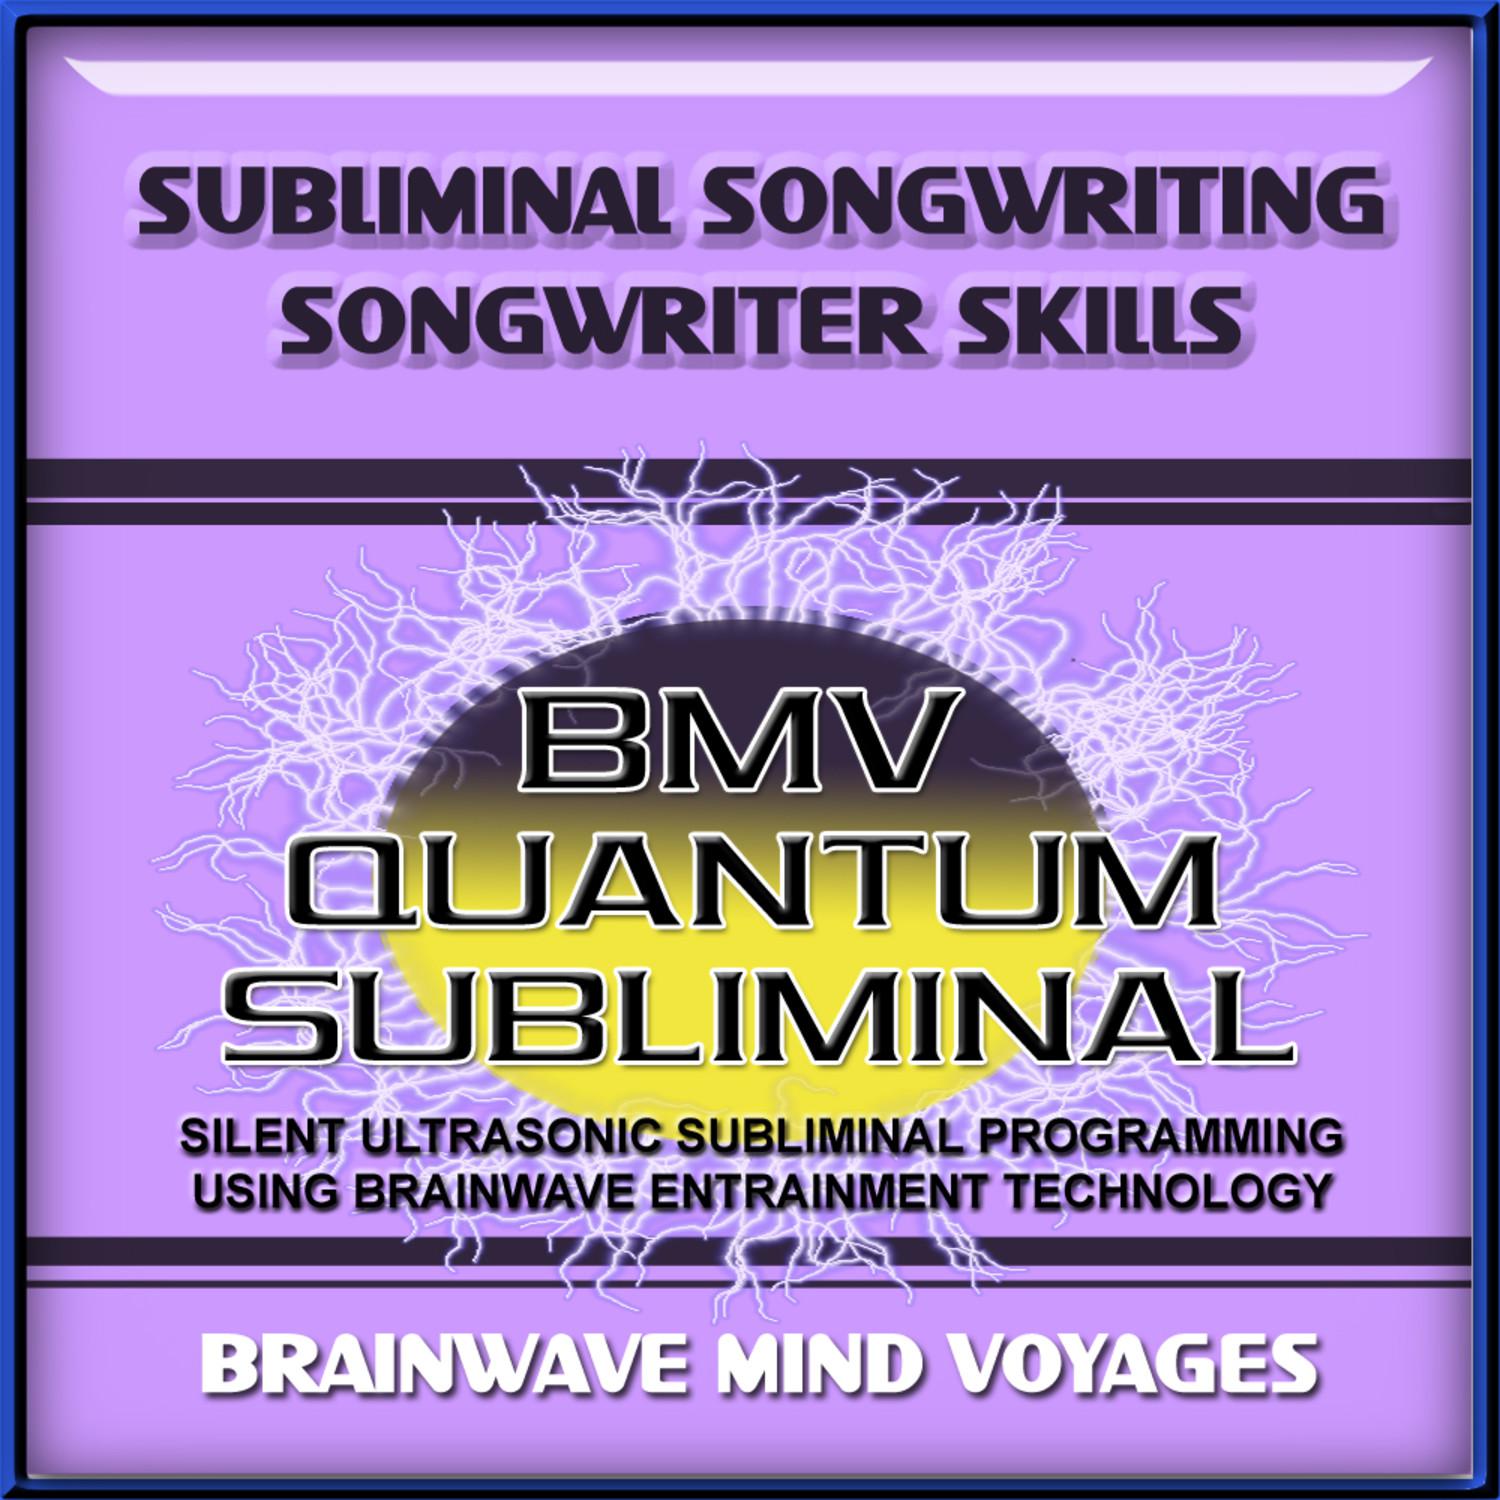 Subliminal Songwriting Songwriter Skills